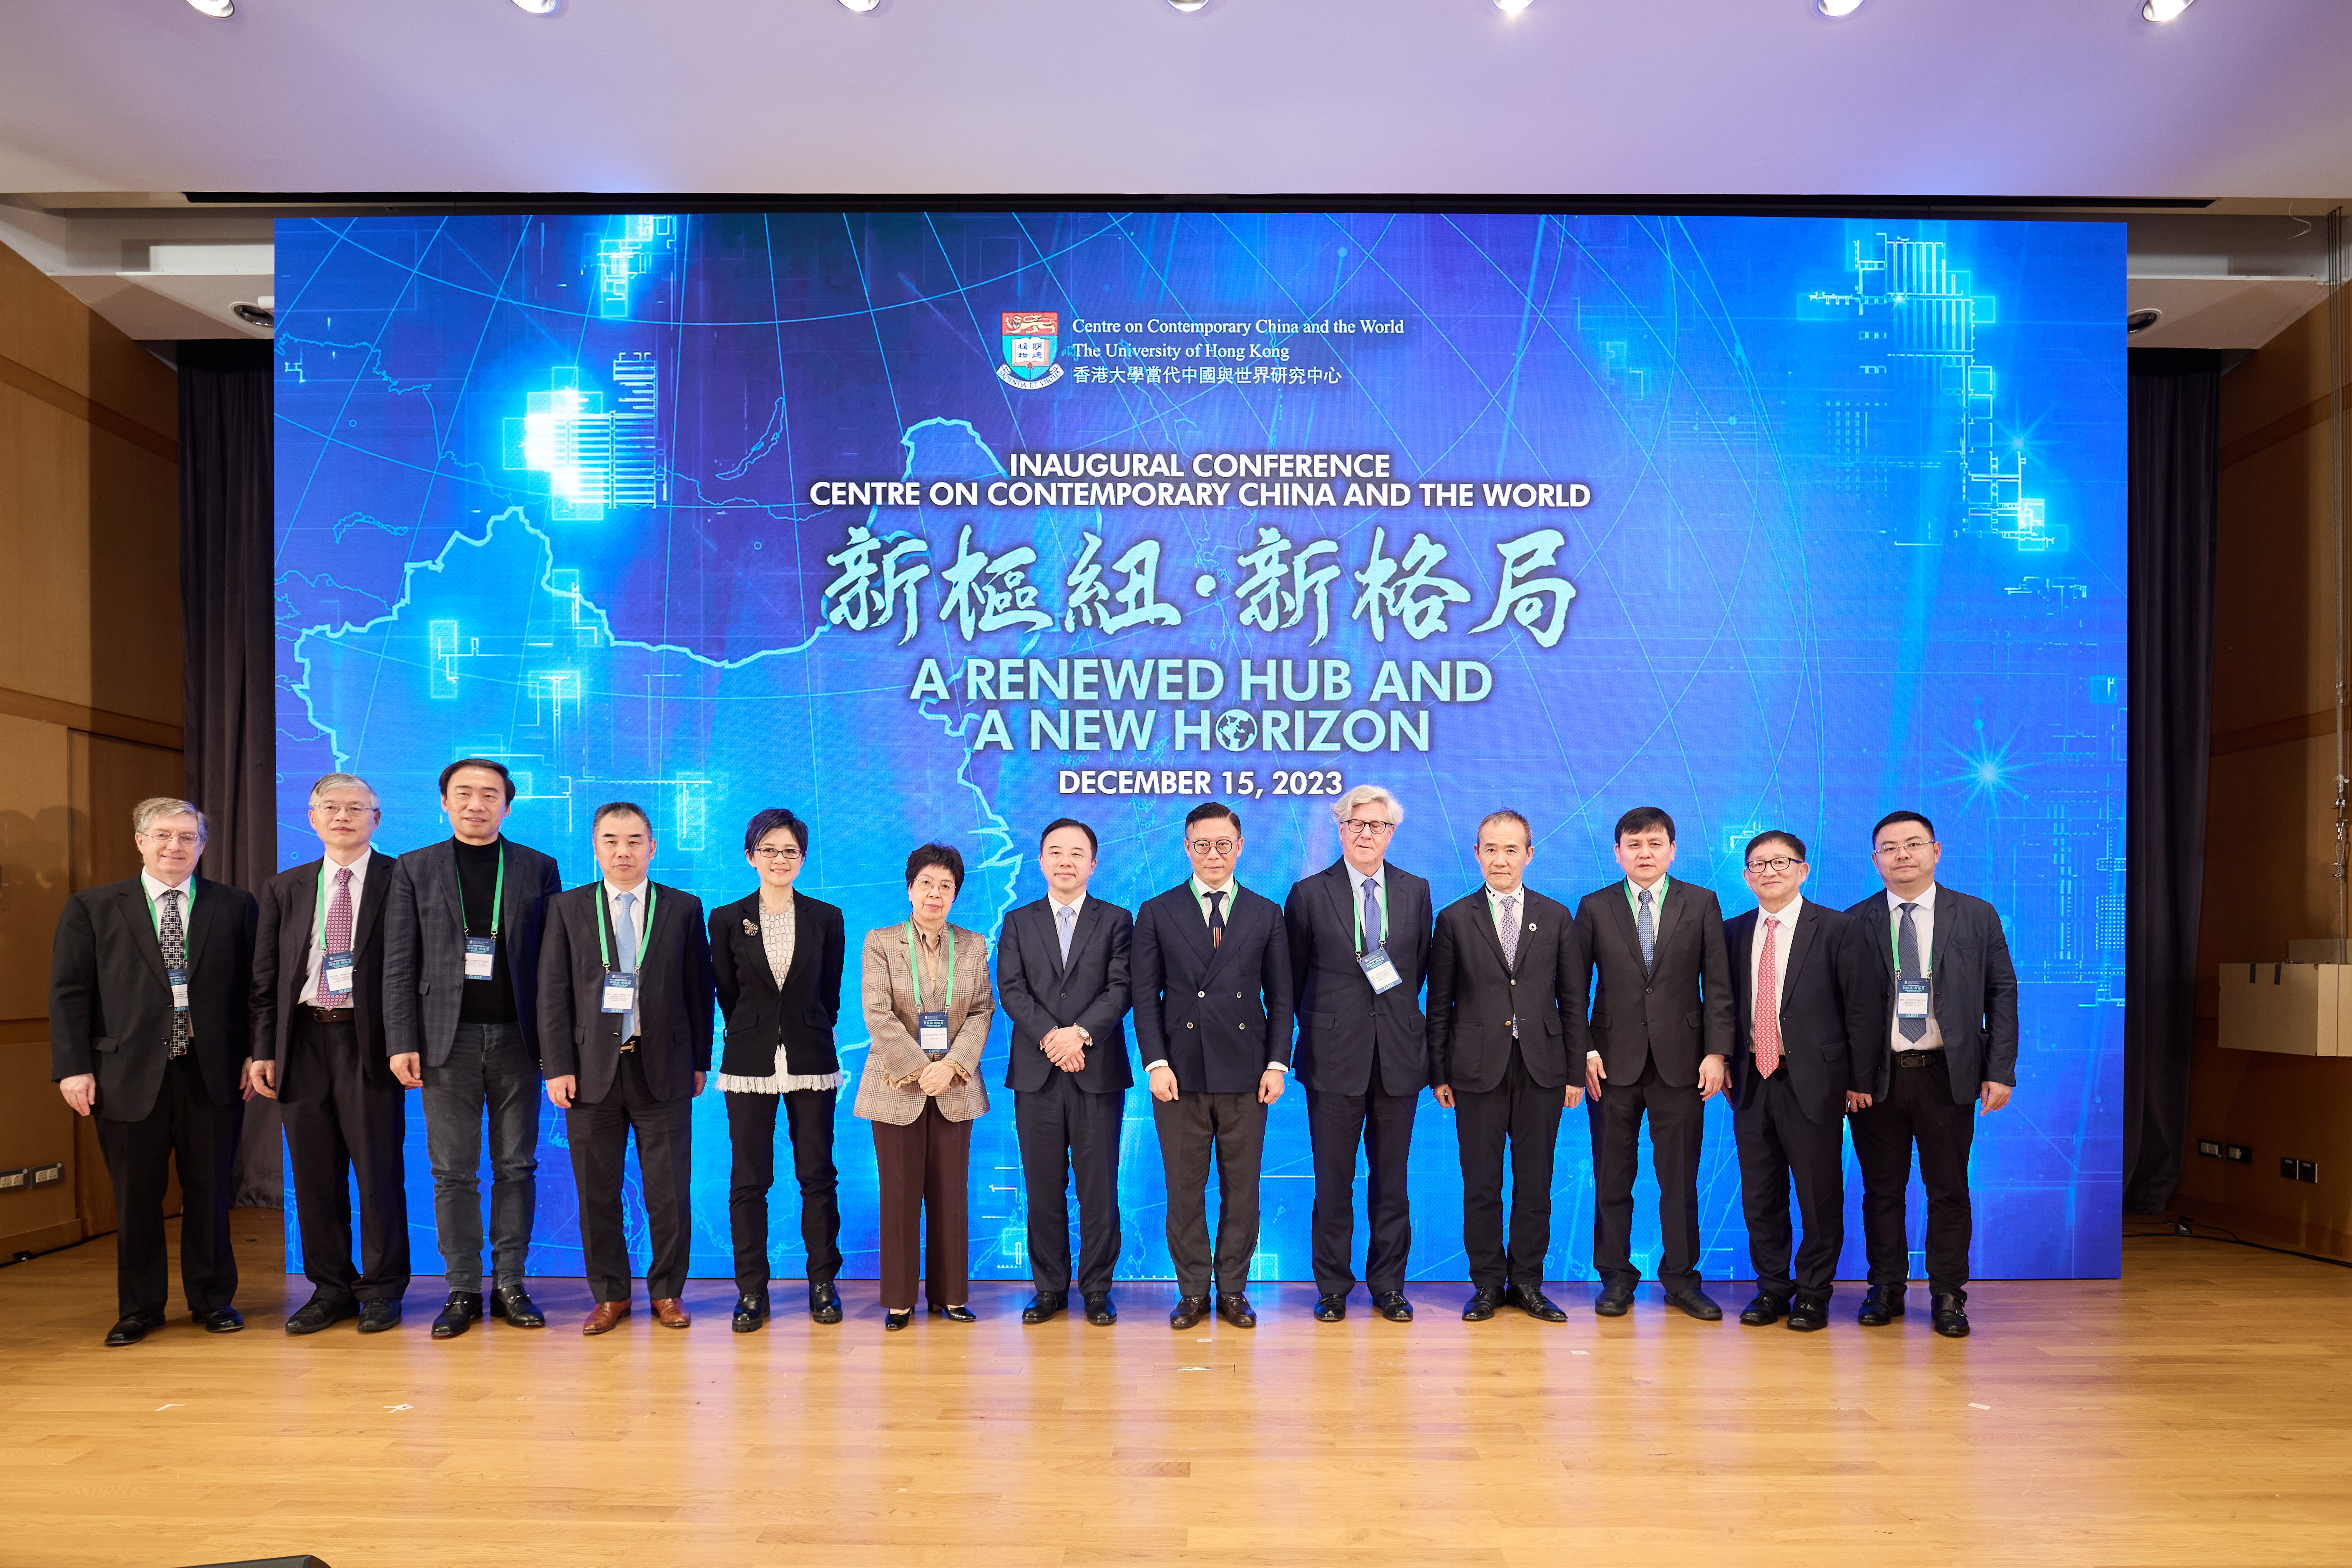 The Centre on Contemporary China and the World (CCCW) at The University of Hong Kong (HKU) marked its official launch by hosting its Inaugural Conference, titled 